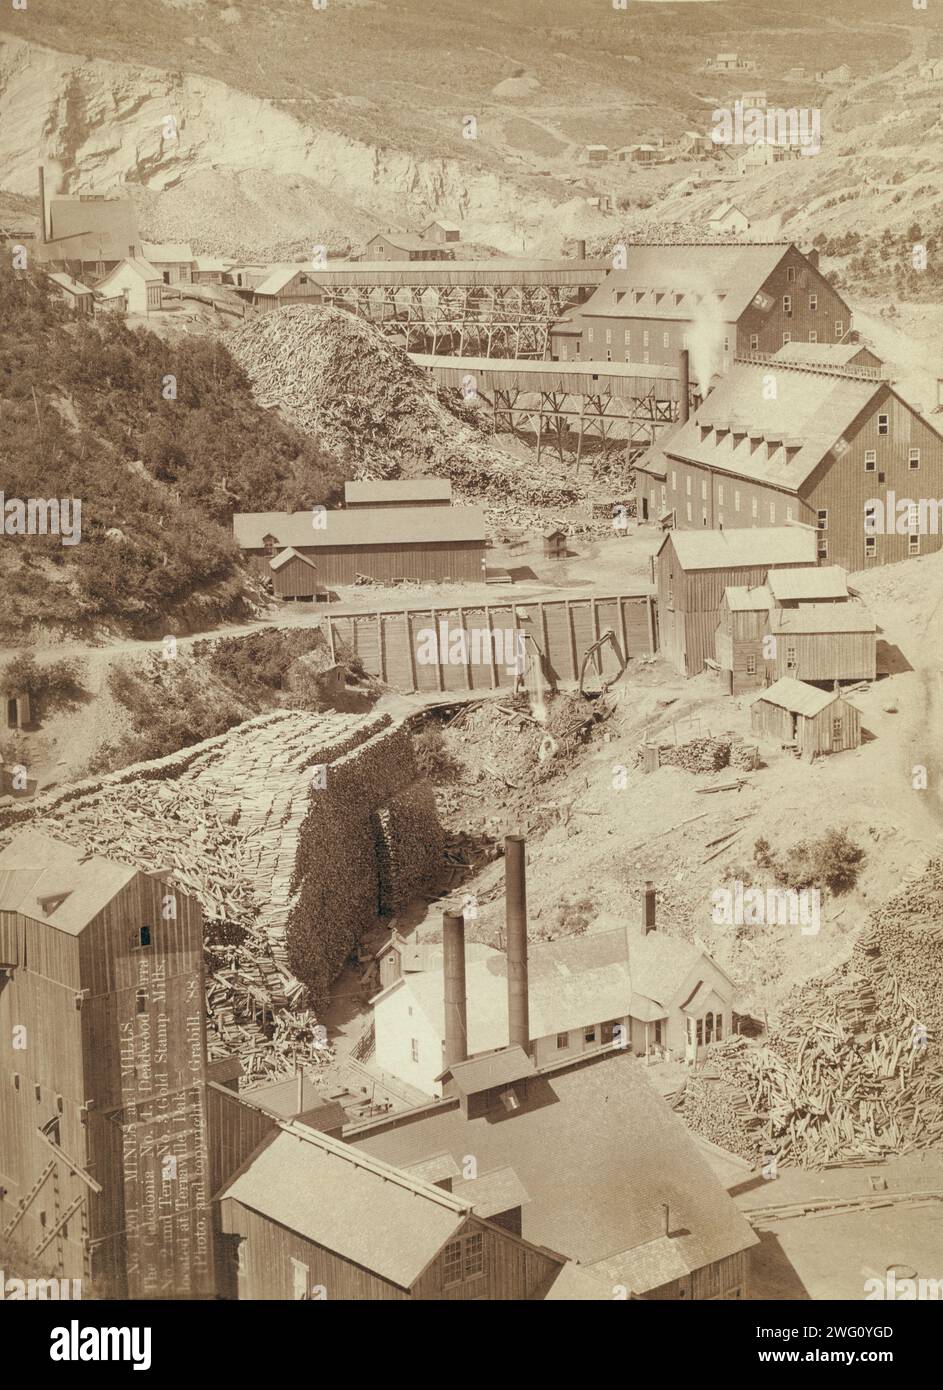 Mines and Mills. The Caledonia No. 1, Deadwood Terra No. 2, and Terra No. 3. Gold Stamp Mills, located at Terraville, Dak. []. Three prominent lumber mills and stacks of lumber. Stock Photo